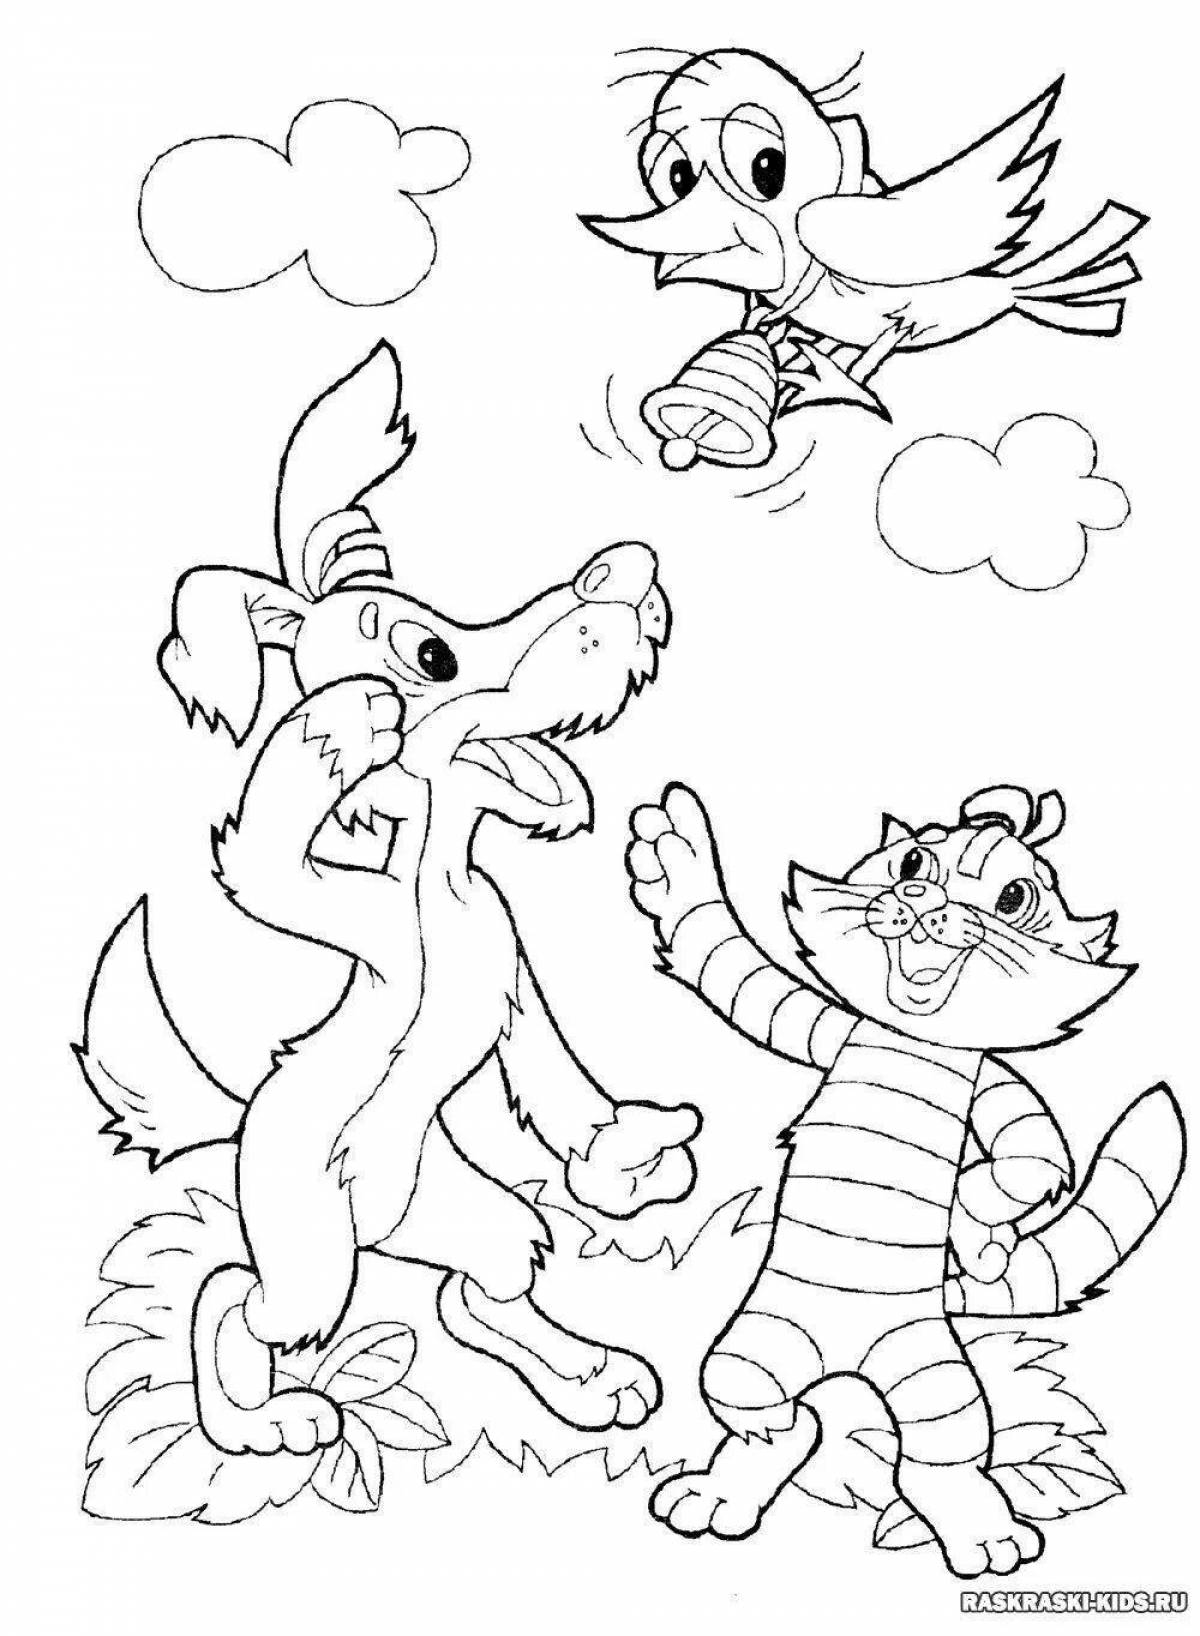 Awesome sailor skin coloring page for preschoolers